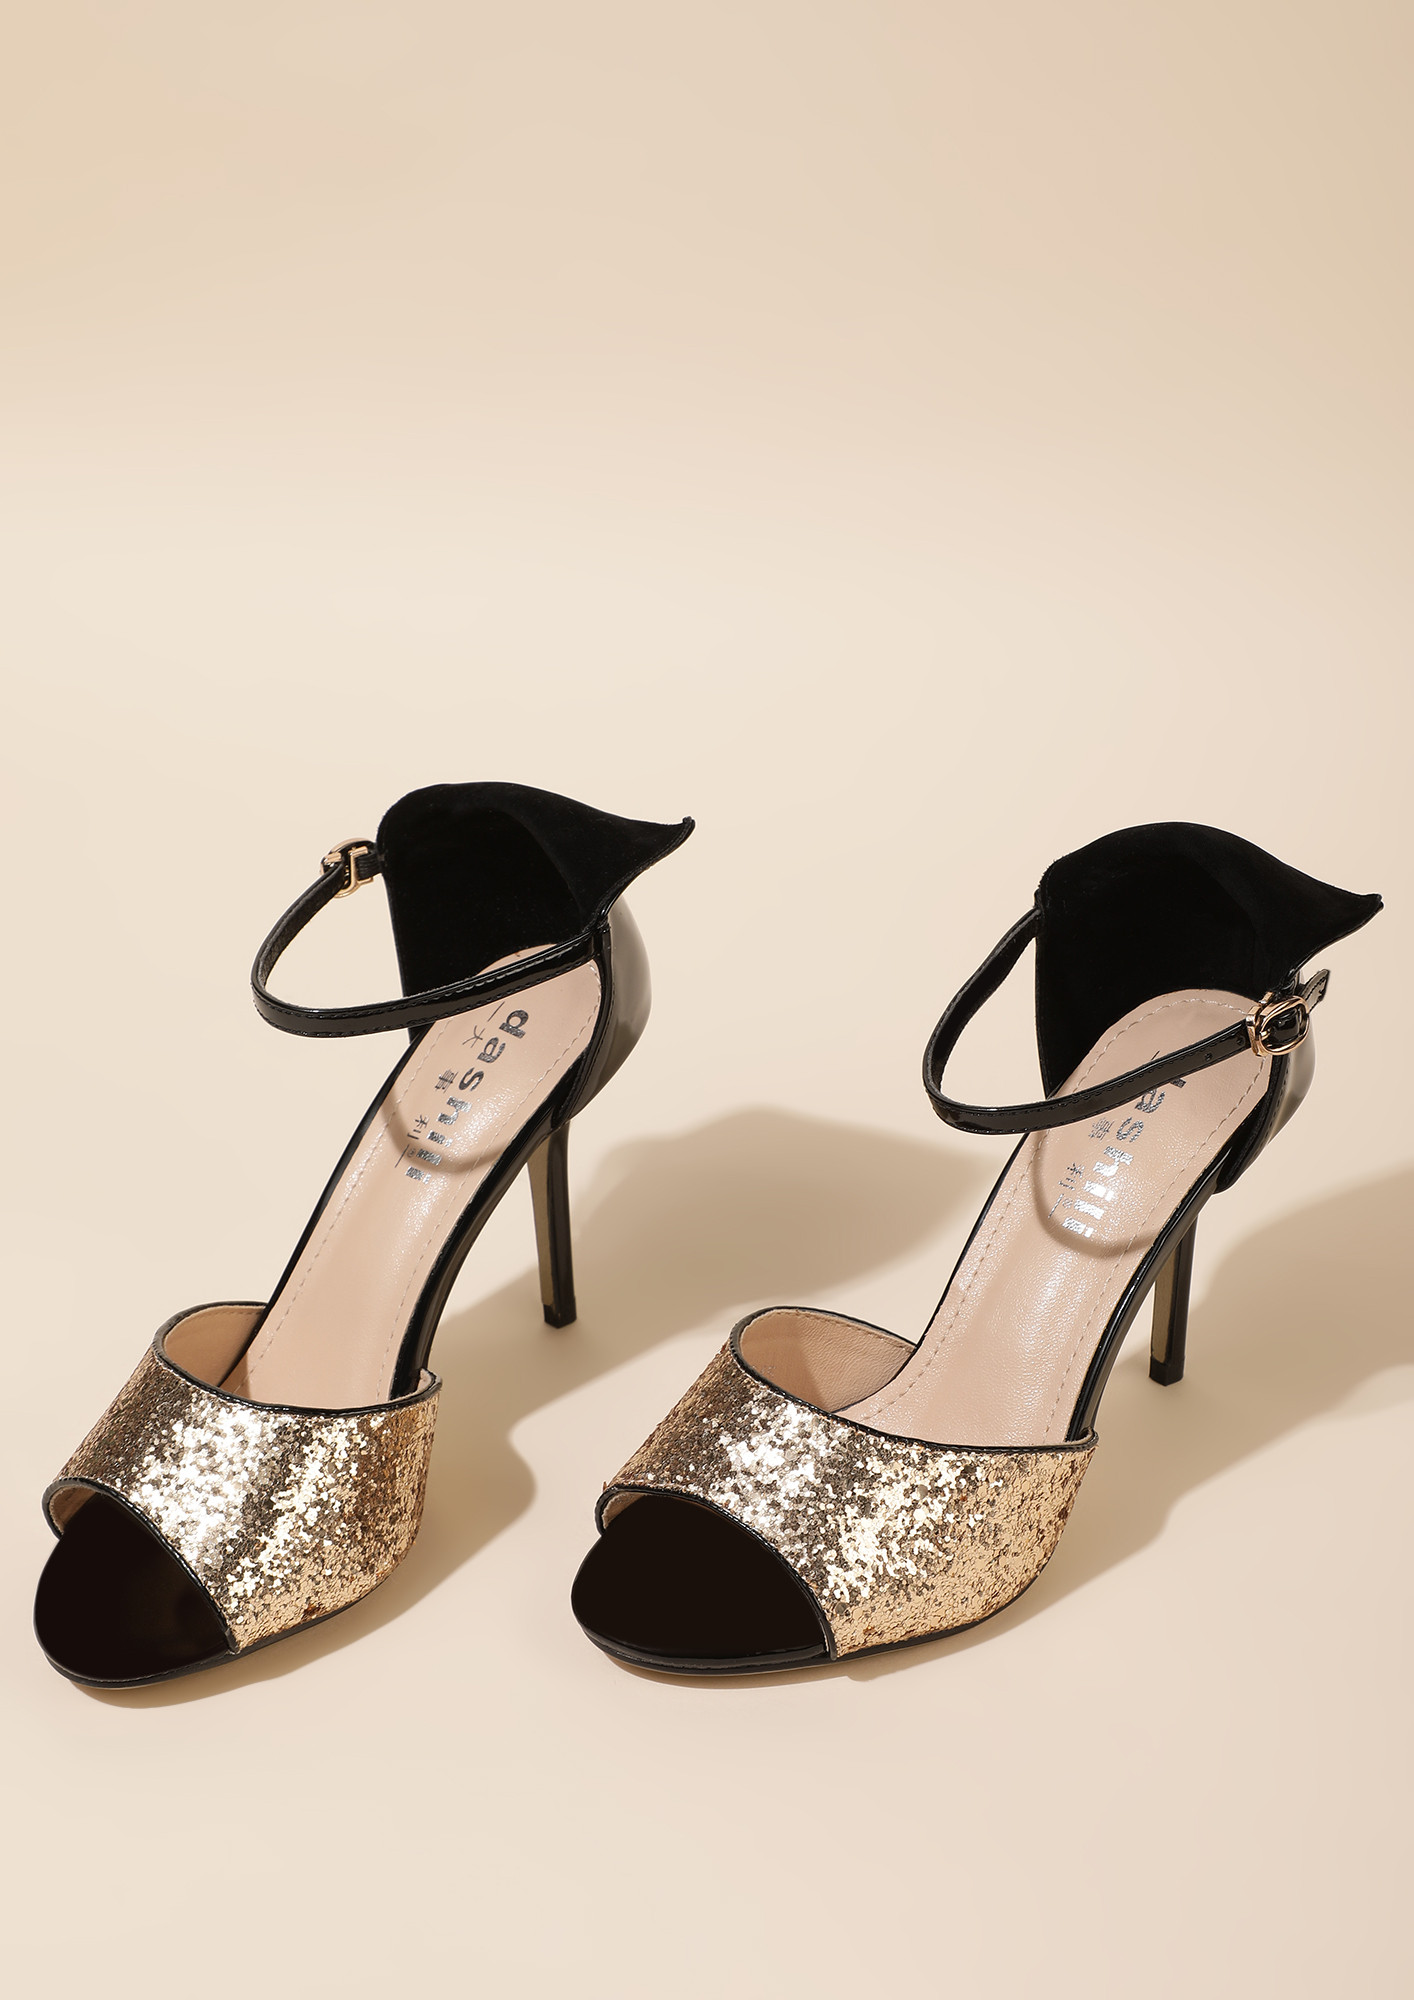 ALL SET TO PARTY GOLDEN PEEP-TOE SANDALS